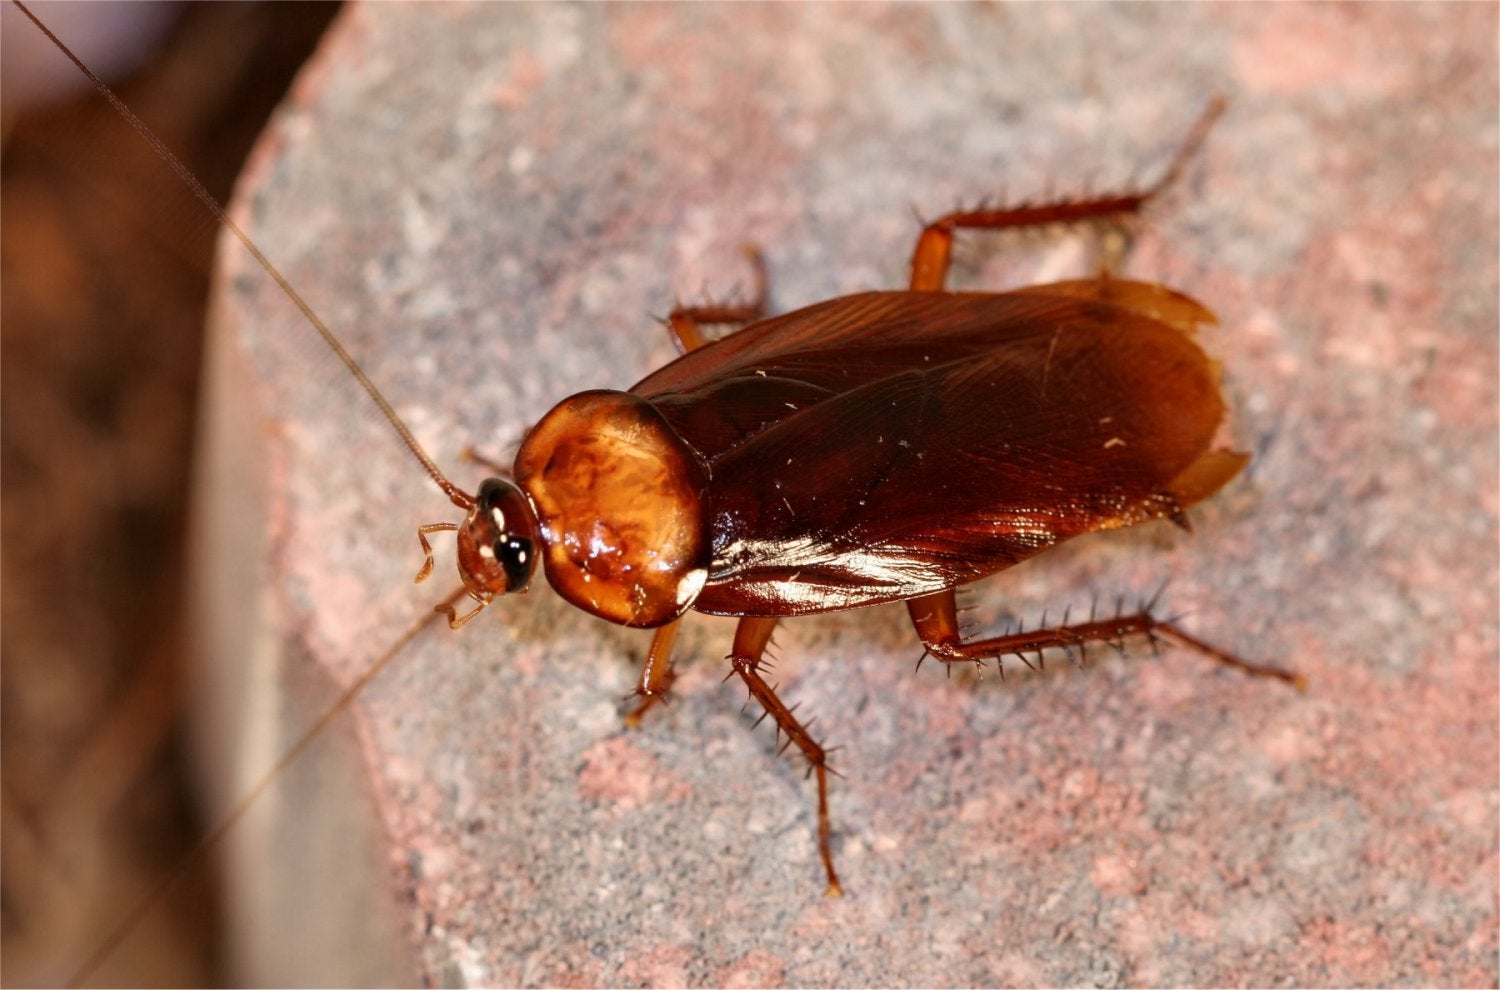 M'sians Can Name A Cockroach After Their Exes As The Perfect Gift For Valentine's Day - WORLD OF BUZZ